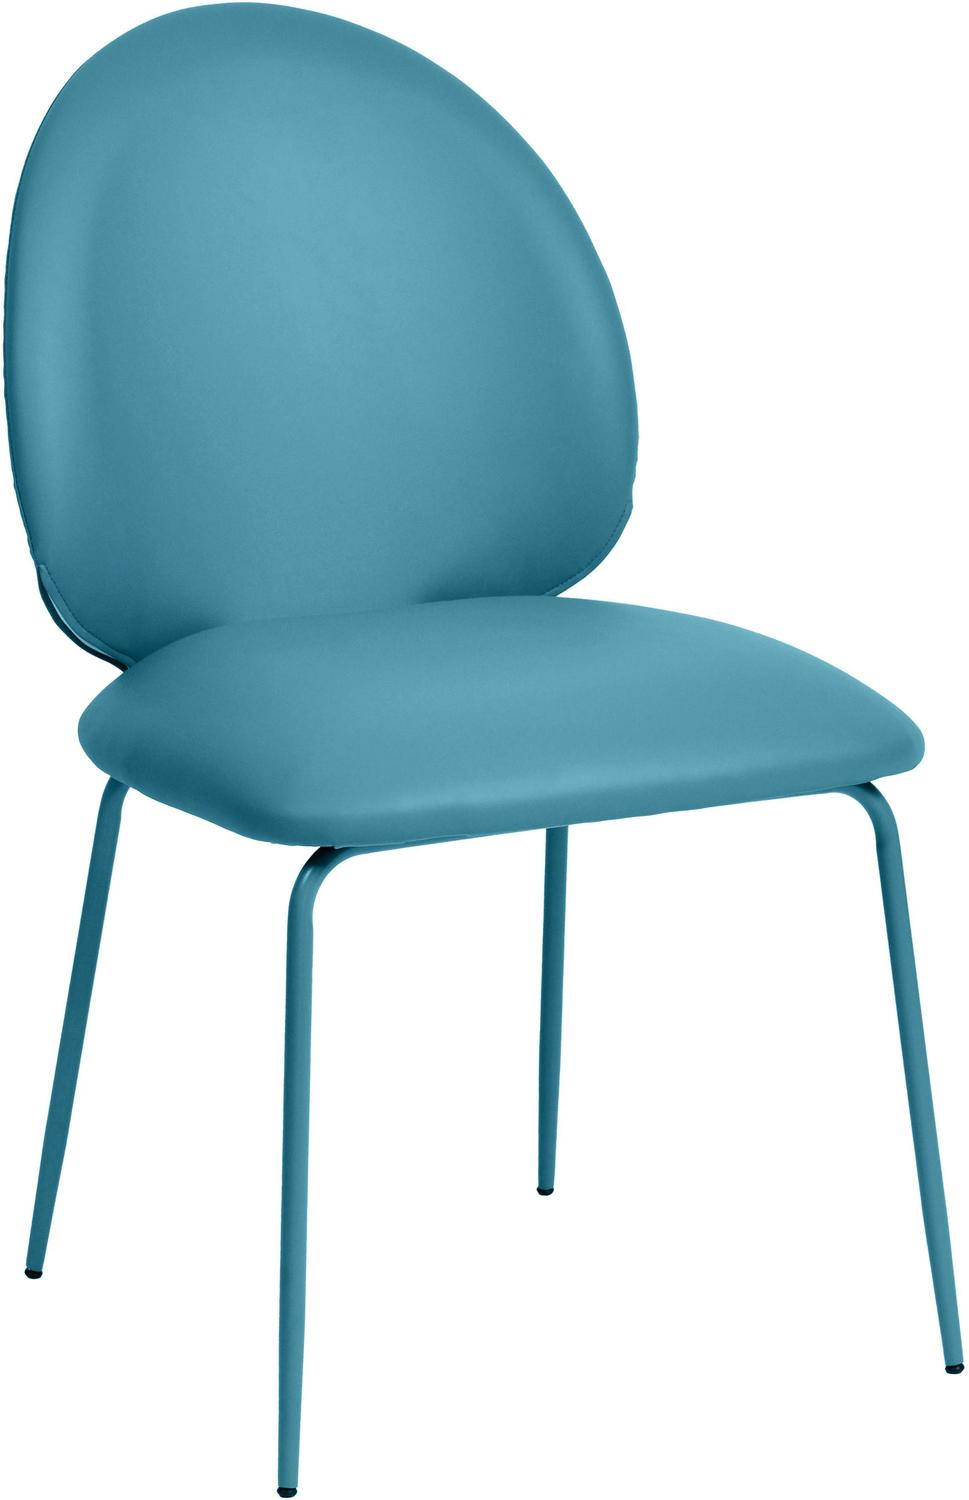 moon armchair Contemporary Design Furniture Dining Chairs Blue